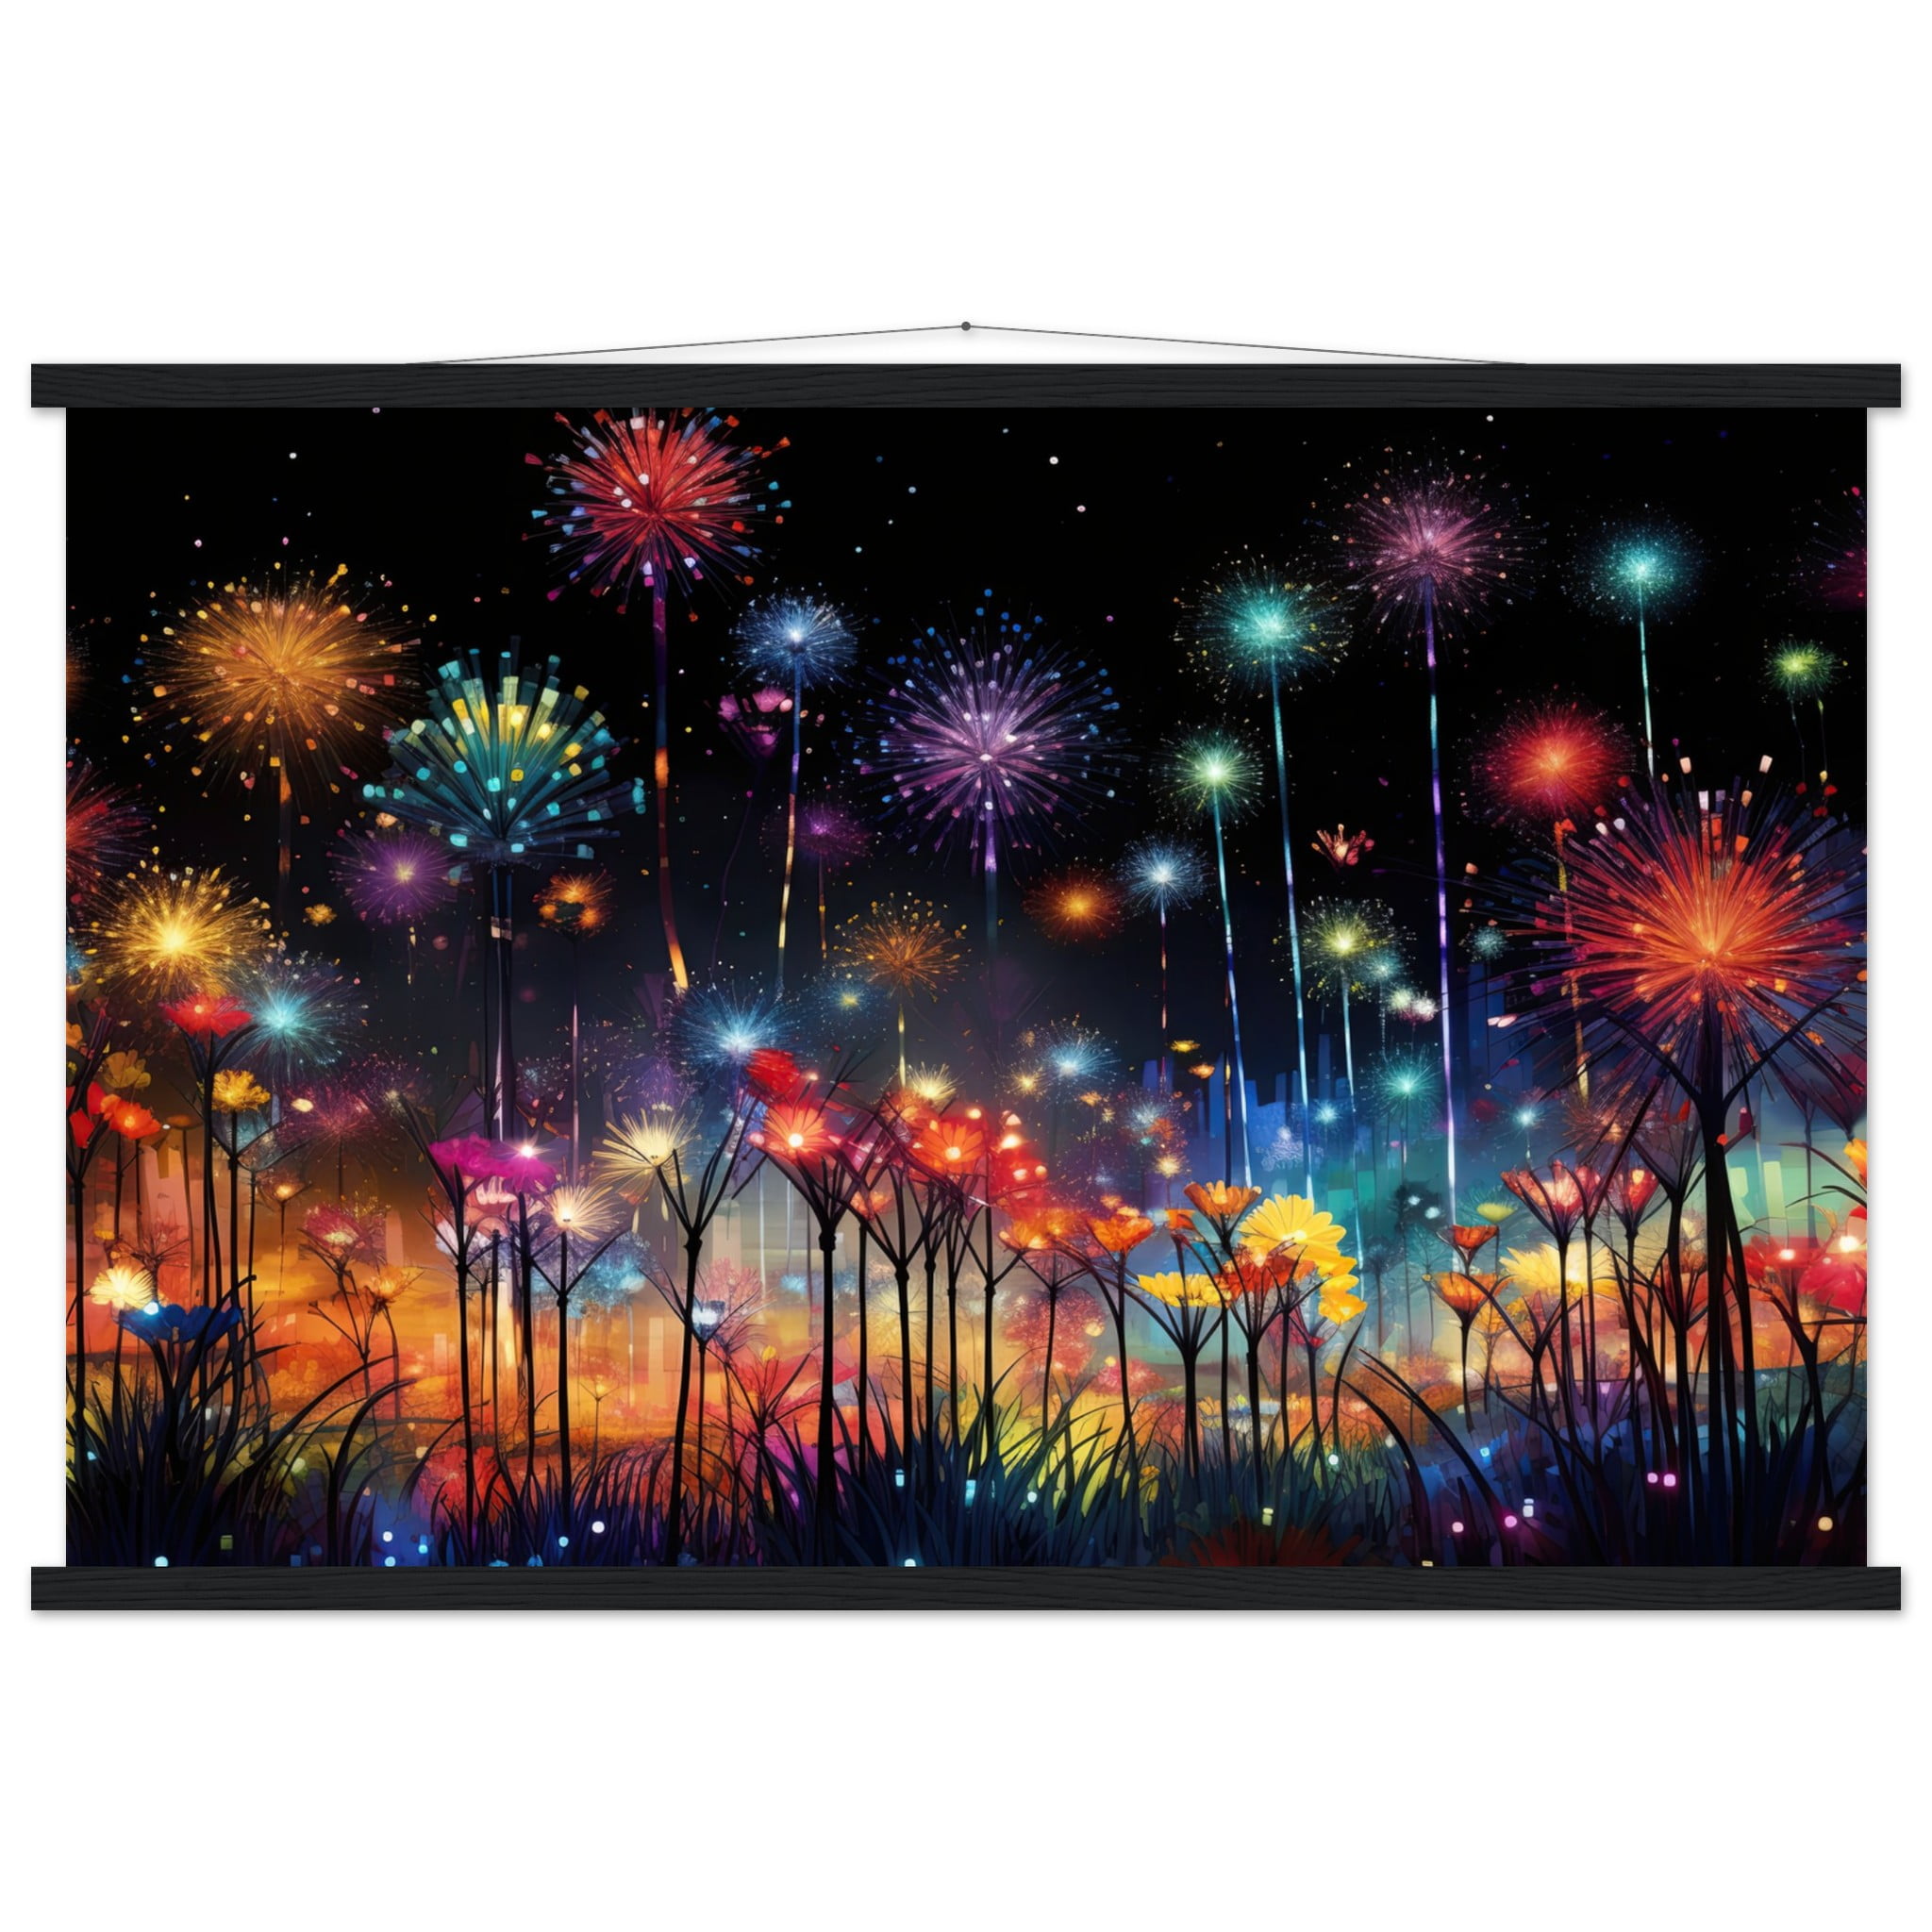 Fireworks and Flowers of Light and Color – Art Print with Hanger